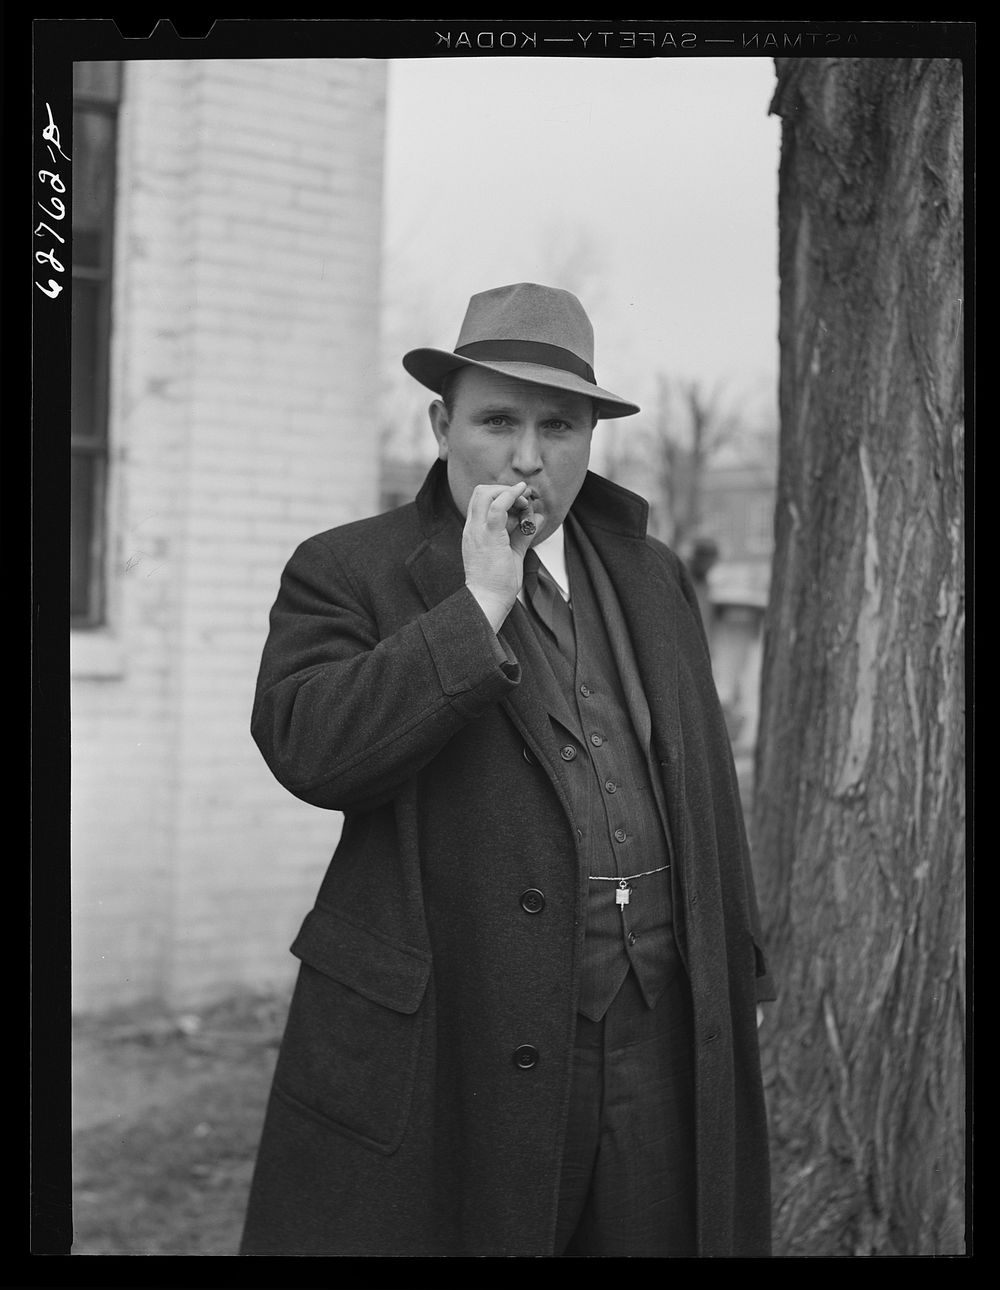 Judge. Rustburg, Virginia. Sourced from the Library of Congress.